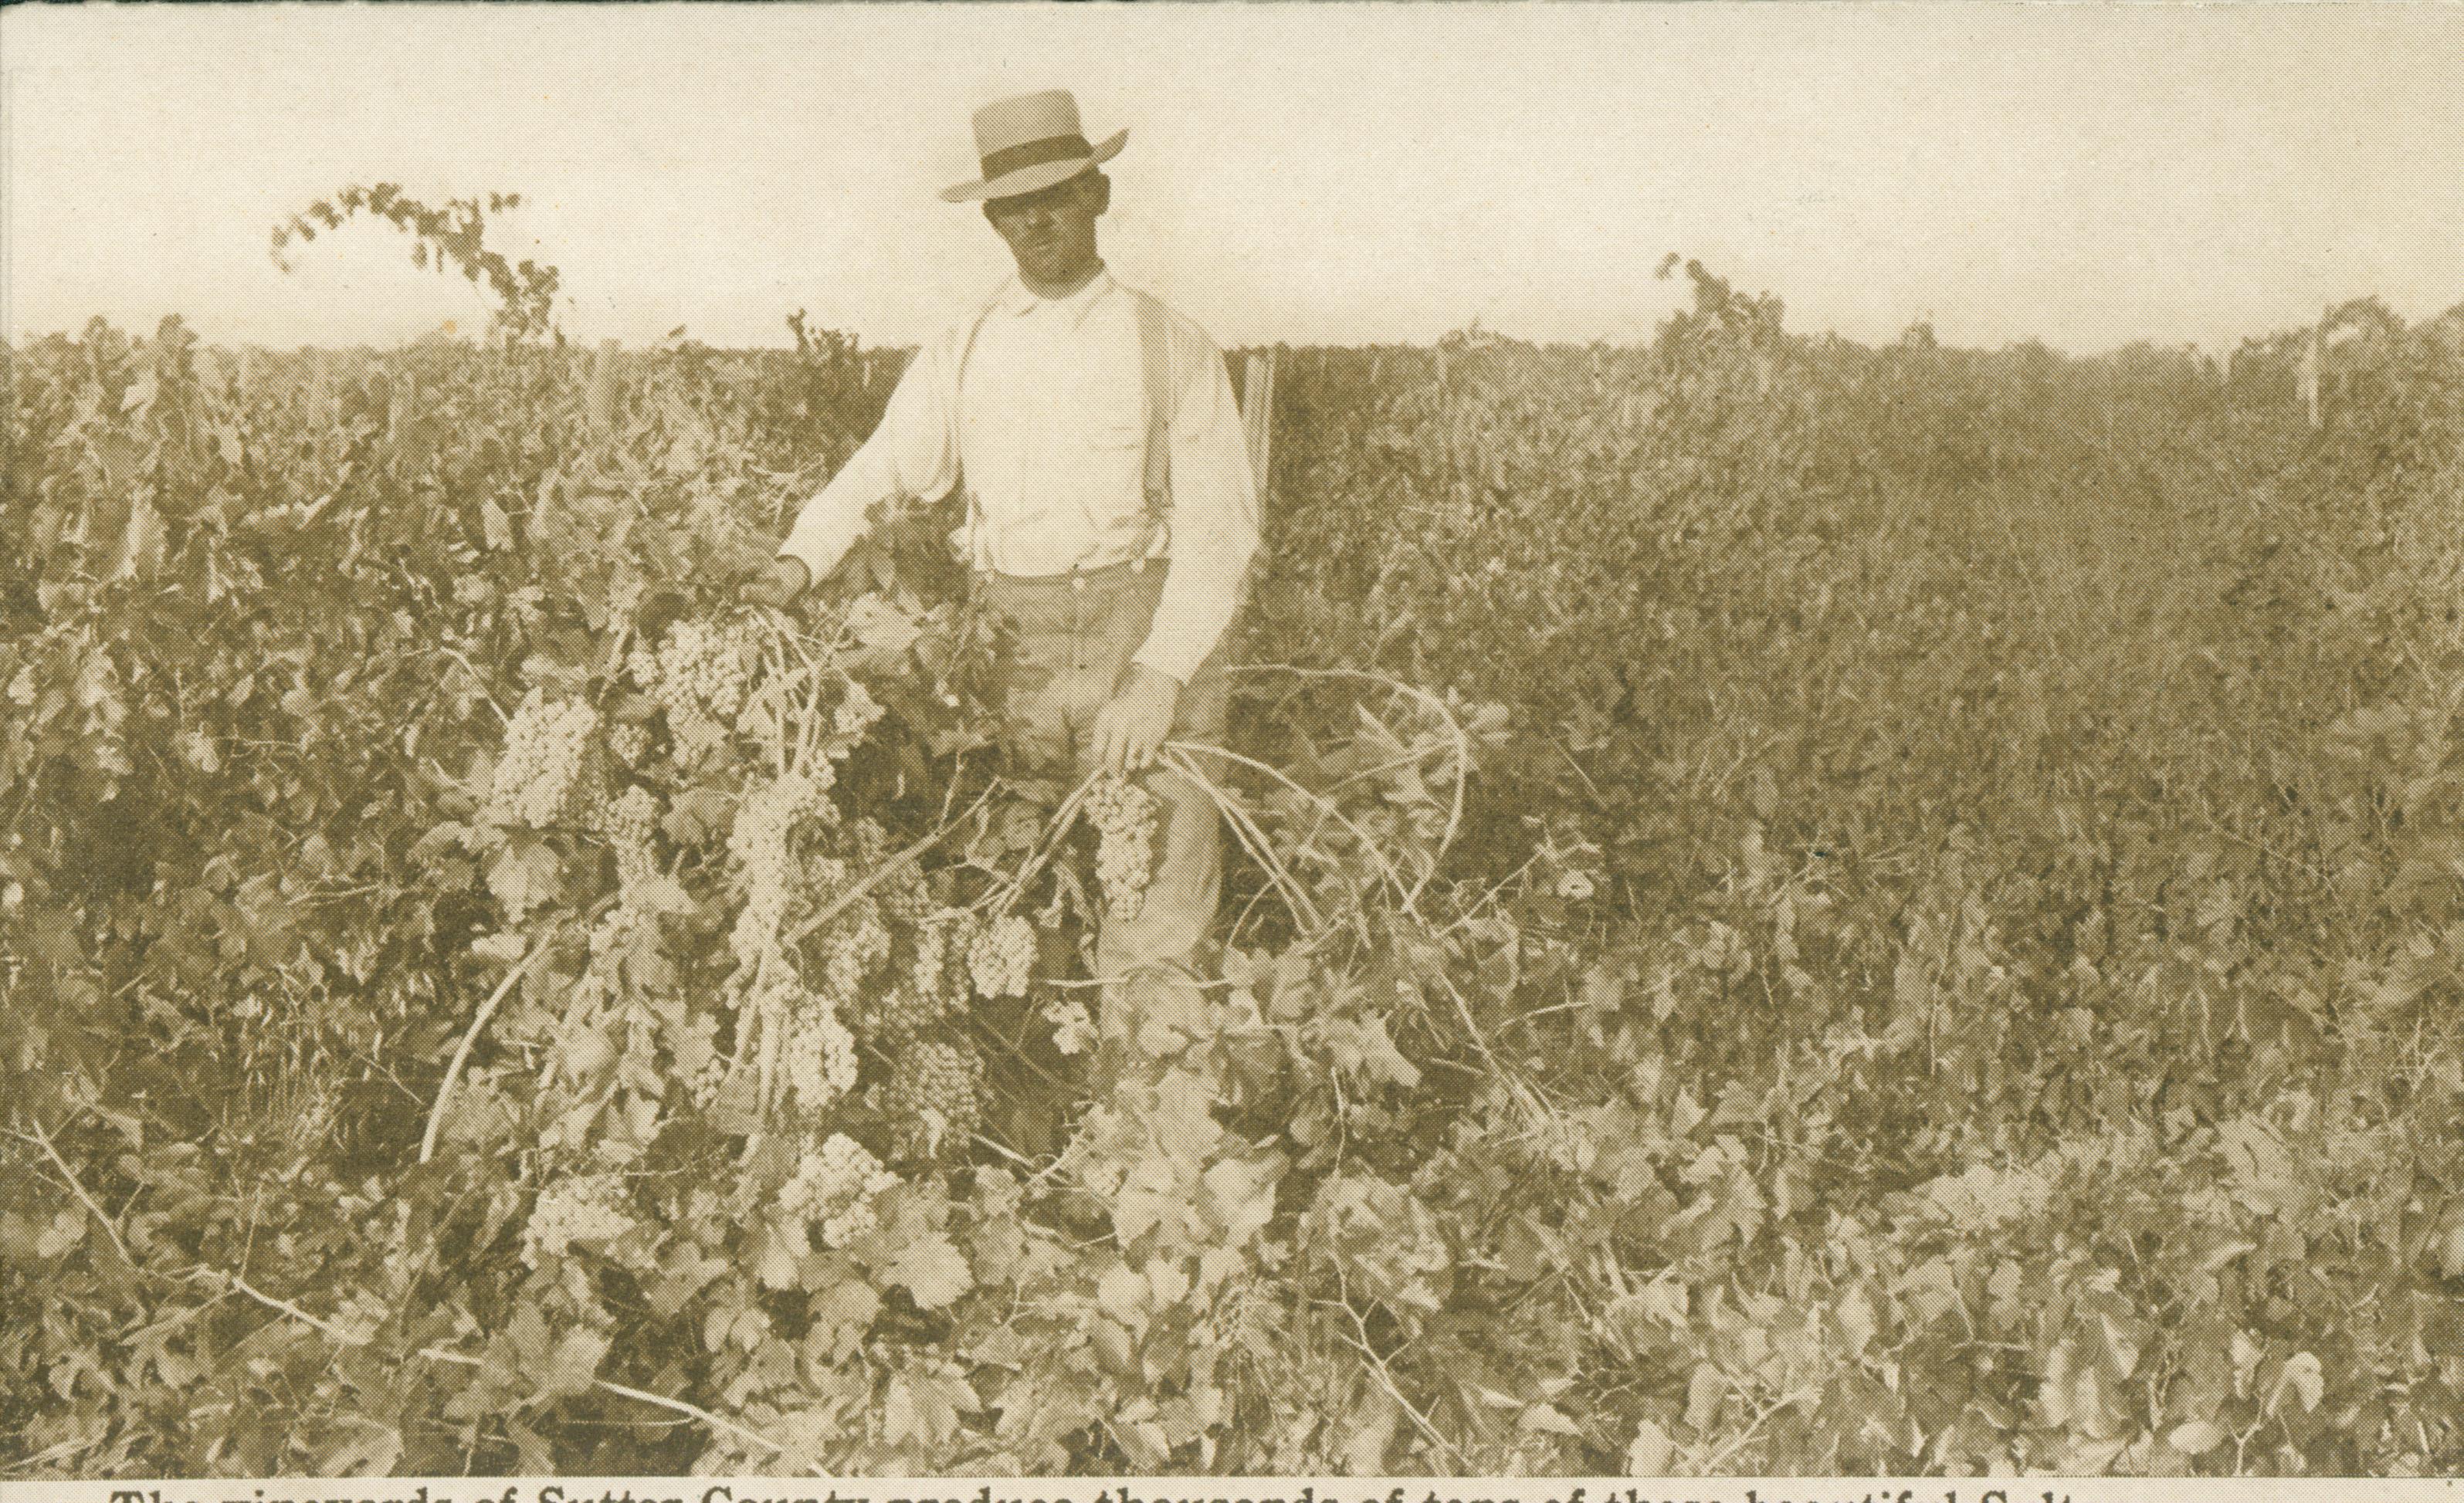 Shows a man standing by a grape vine loaded with fruit